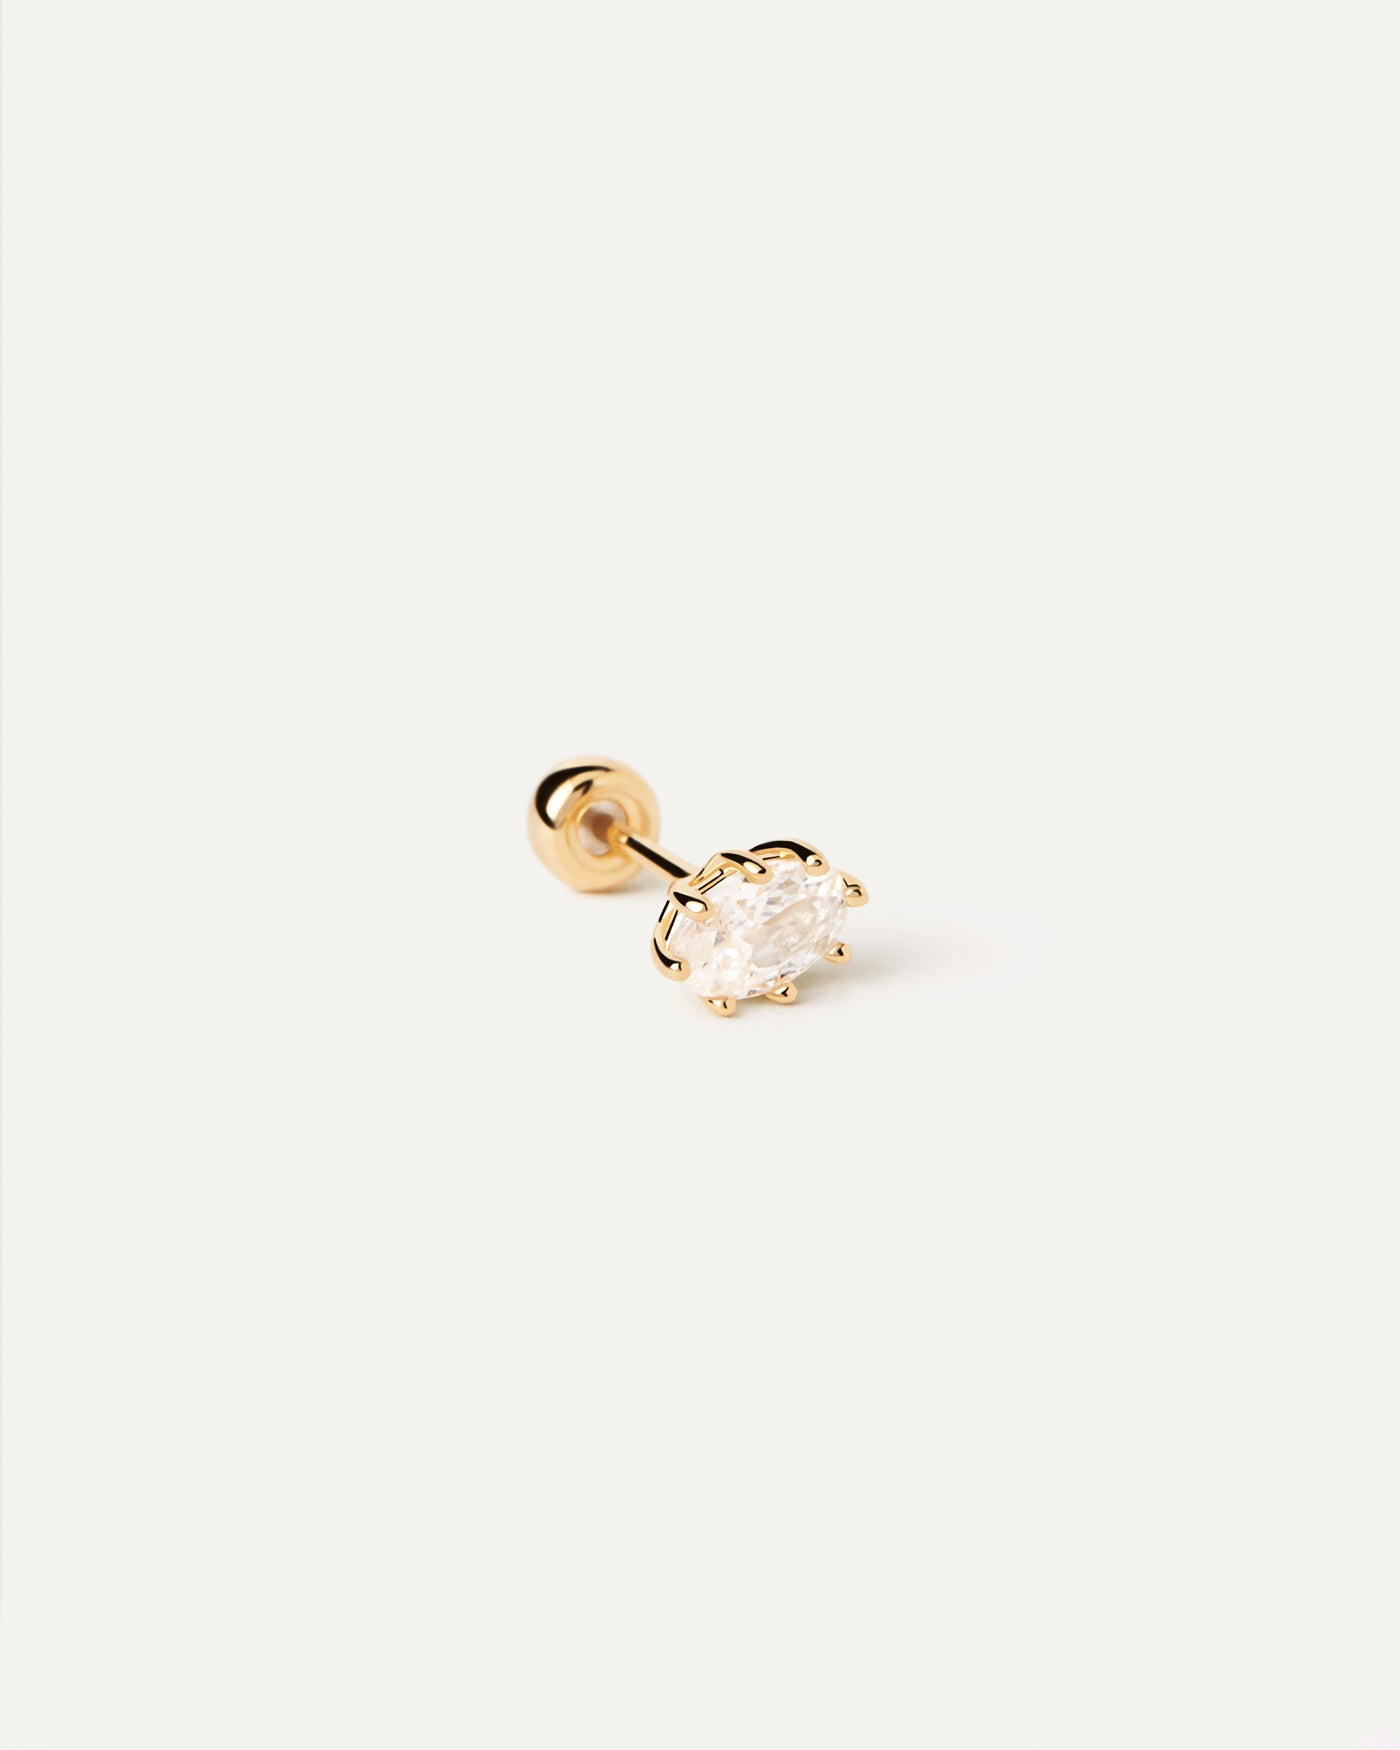 2023 Selection | Umai Single Earring. Gold-plated eight-prong setting oval ear piercing set with white zirconia. Get the latest arrival from PDPAOLA. Place your order safely and get this Best Seller. Free Shipping.